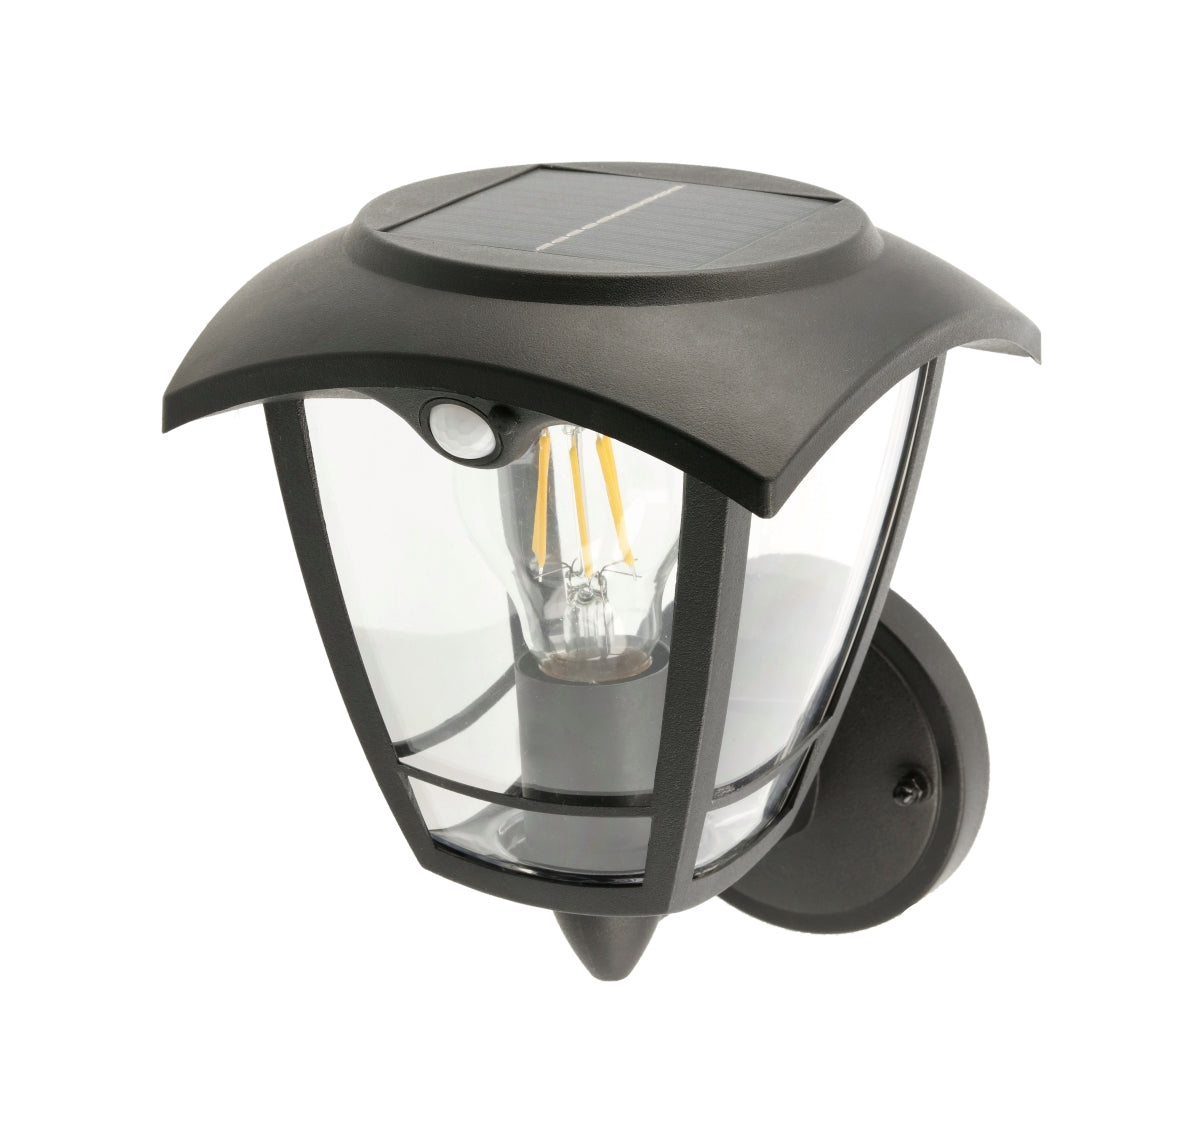 Create an aesthetically pleasing lighting system around your home with our Lara solar lantern light for your walls. This product is featured as an elegant and traditional lantern wall light design, constructed from black polycarbonate and fitted with clear polycarbonate diffusers. The Lara wall light comes complete with an integrated filament warm white LED bulb and integrated PIR motion sensor